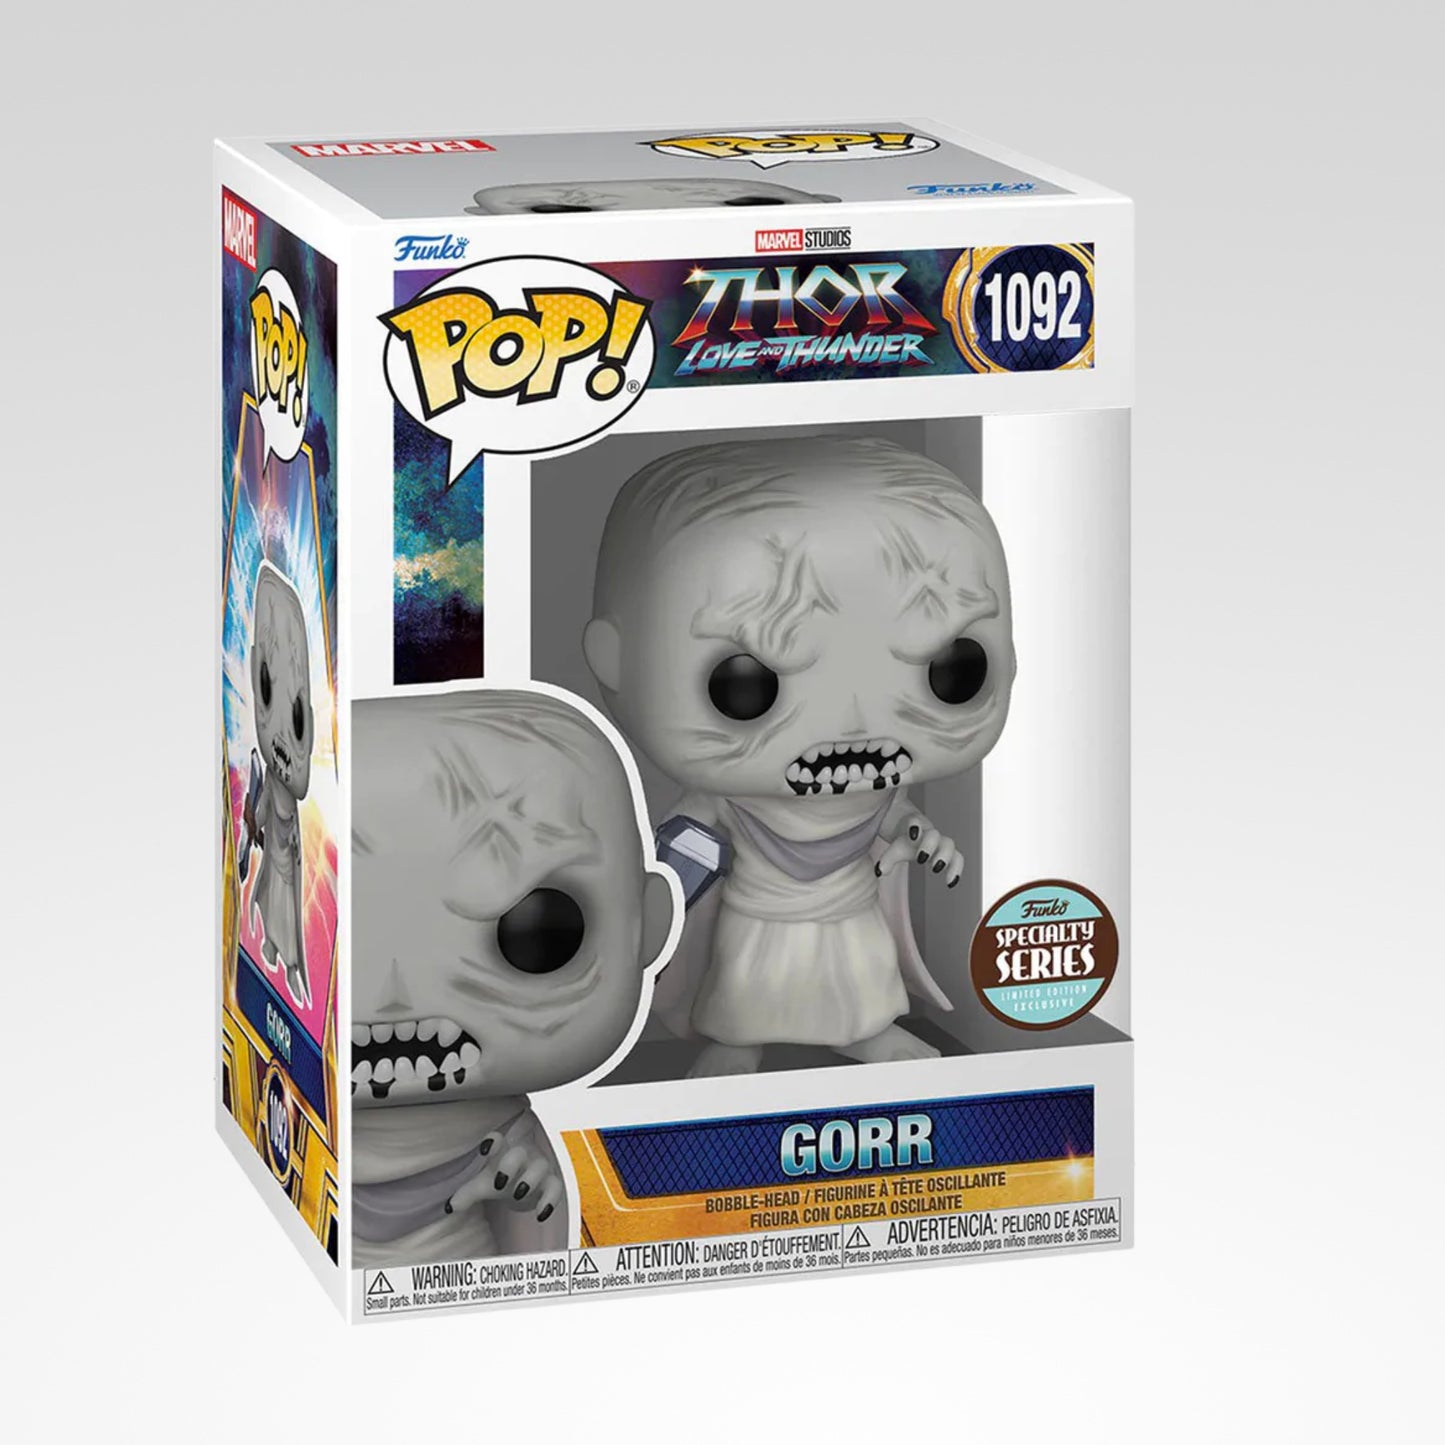 Gorr (Thor: Love and Thunder) Marvel Specialty Series Exclusive Funko Pop!